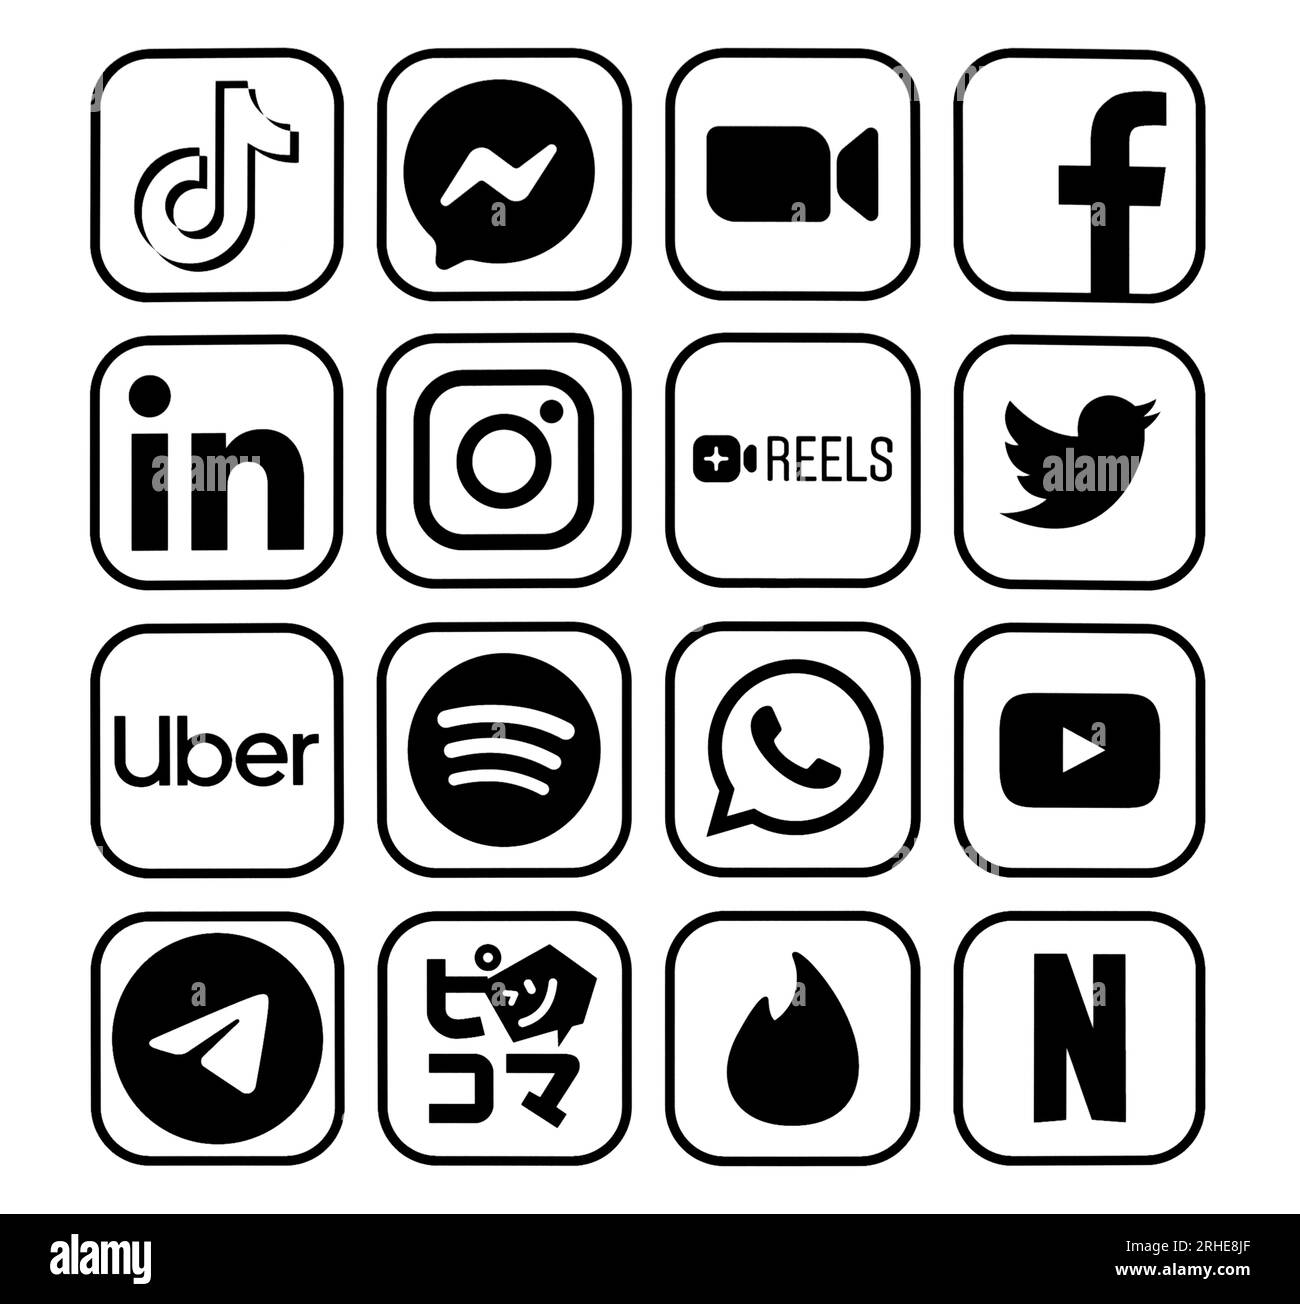 Kiev, Ukraine - January 17, 2023: Set of new popular black mobile apps icons, printed on paper: TikTok, Messenger, Zoom, Facebook and others Stock Photo